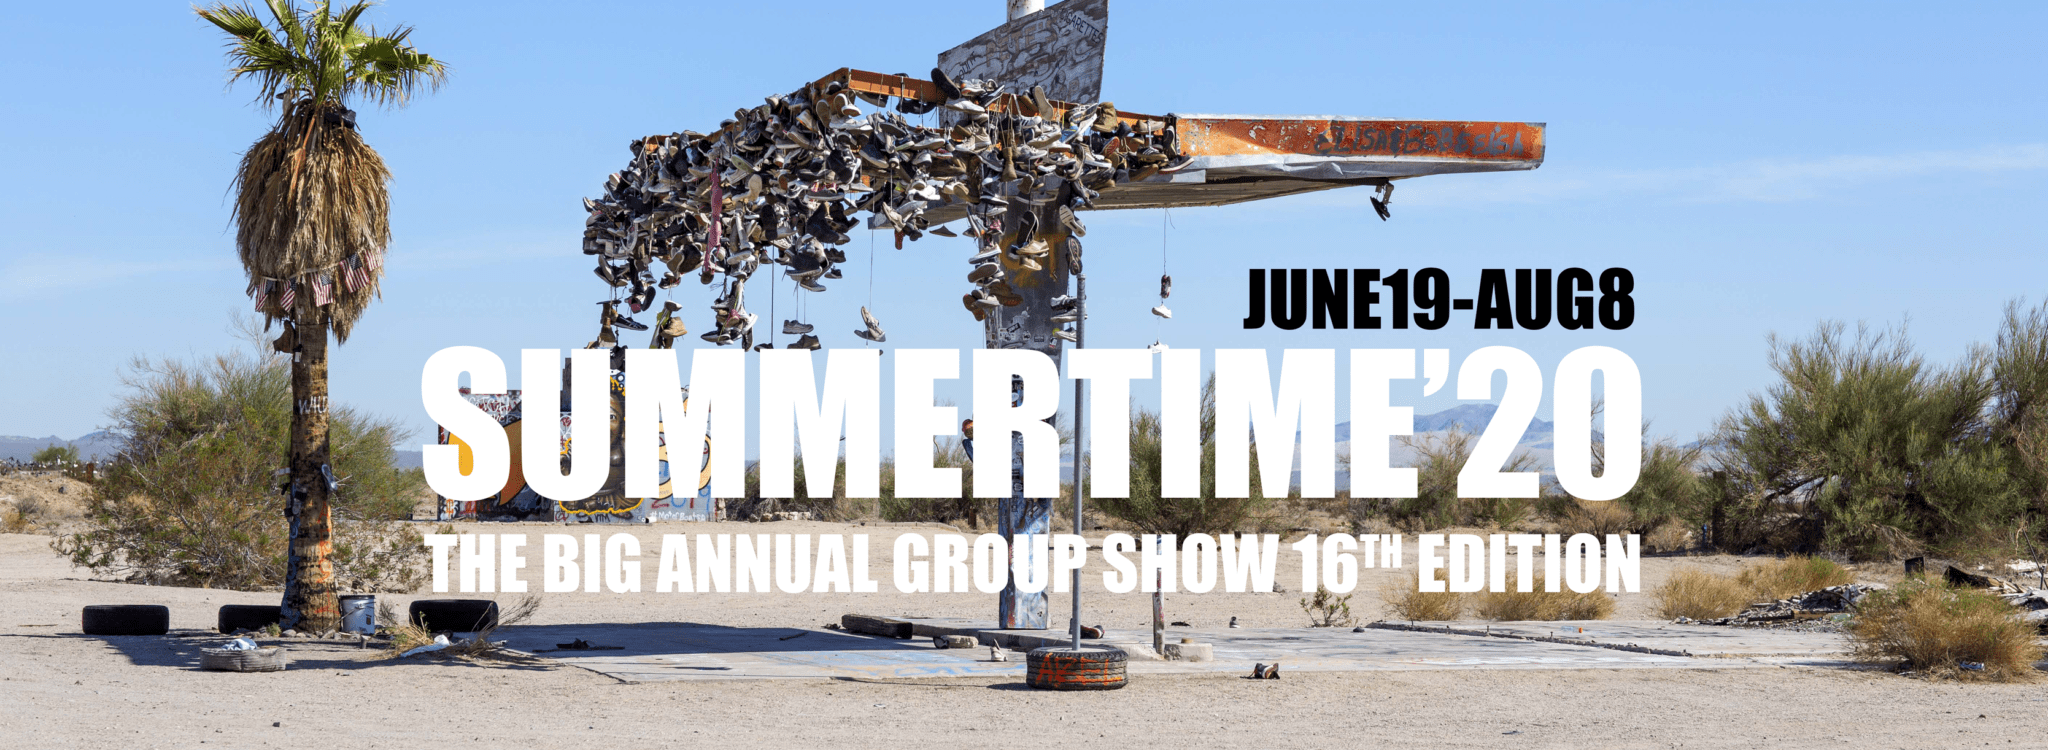 Summertime ’20 – The Annual Group Show 16th Edition